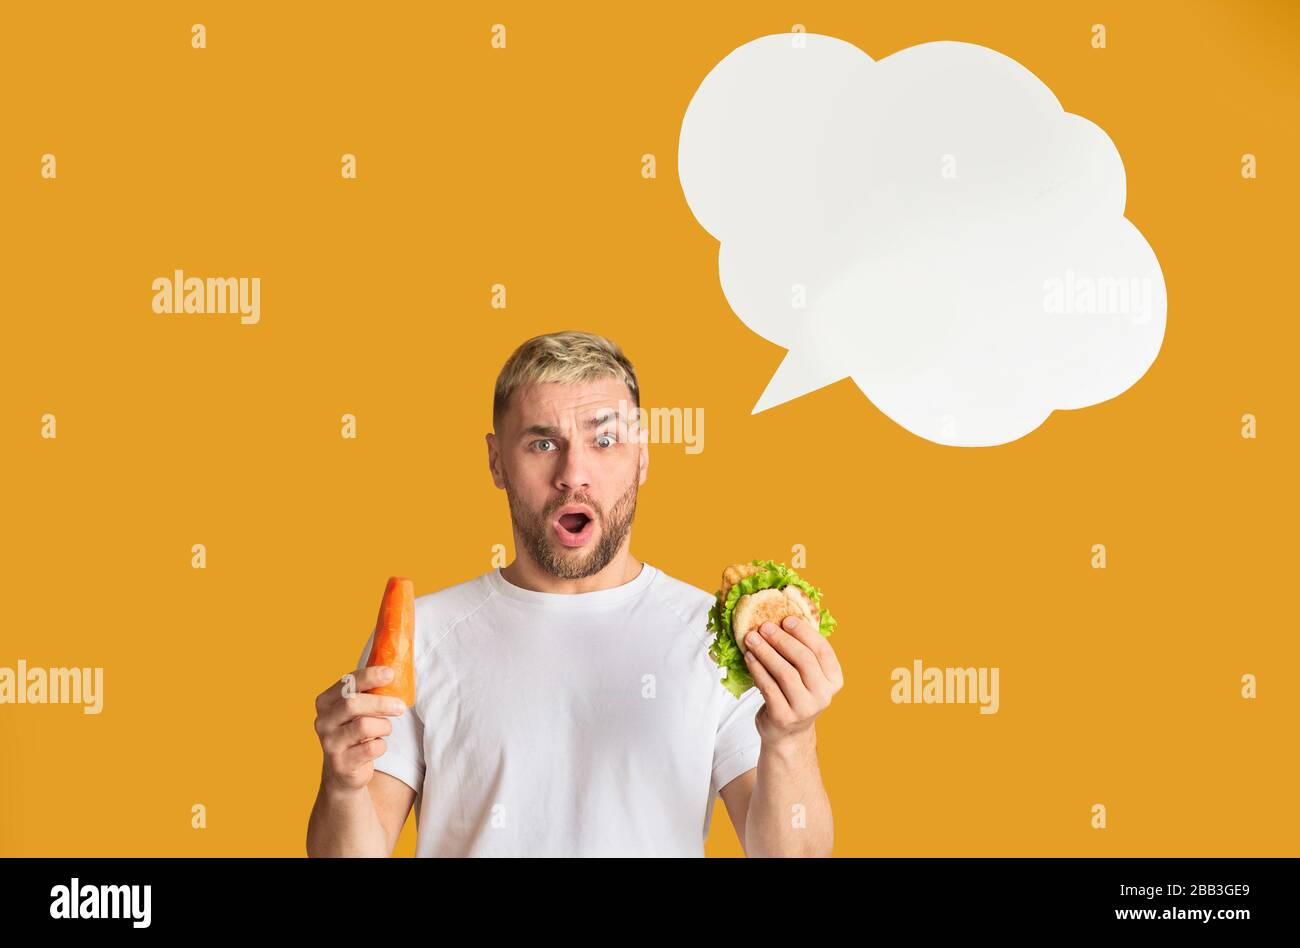 Thinking bubble. Man rejection of junk food Stock Photo